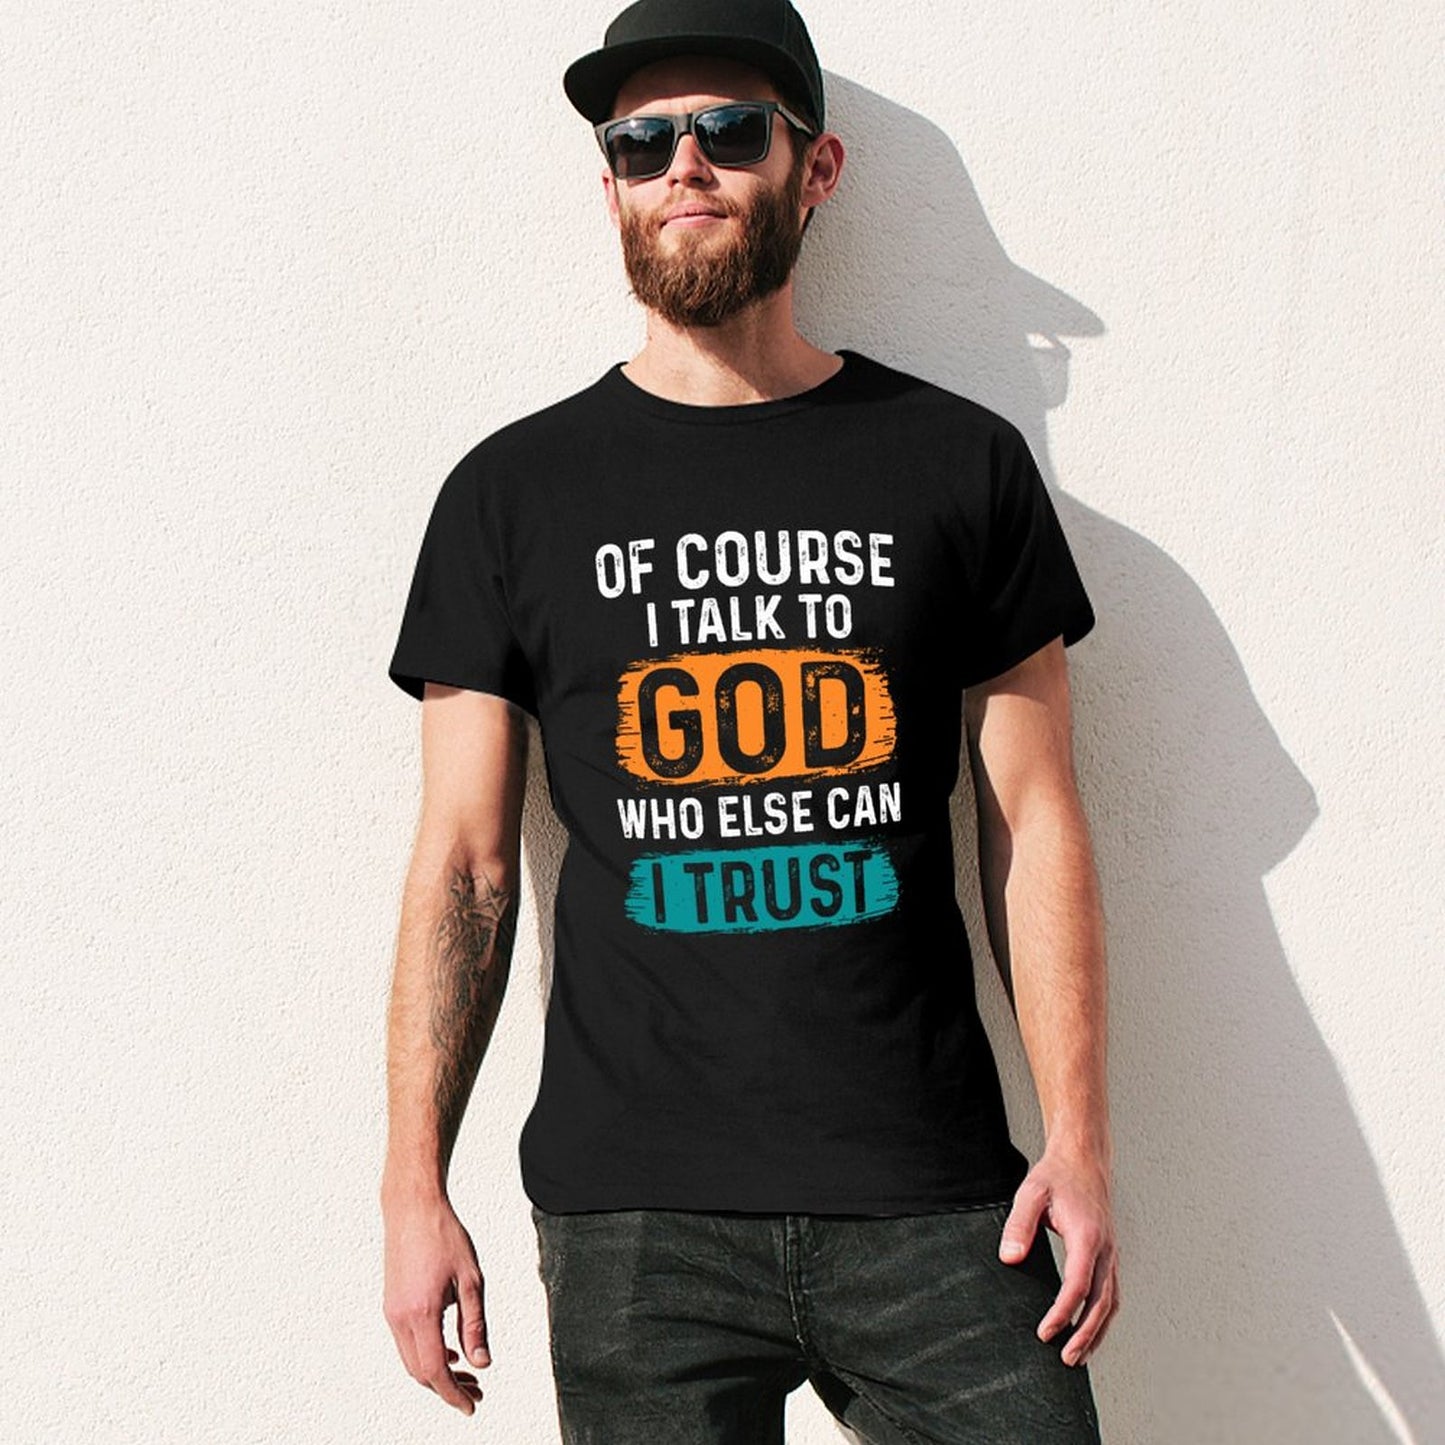 Of Course I Talk To God Who Else Can I Trust Men's Christian T-shirt SALE-Personal Design